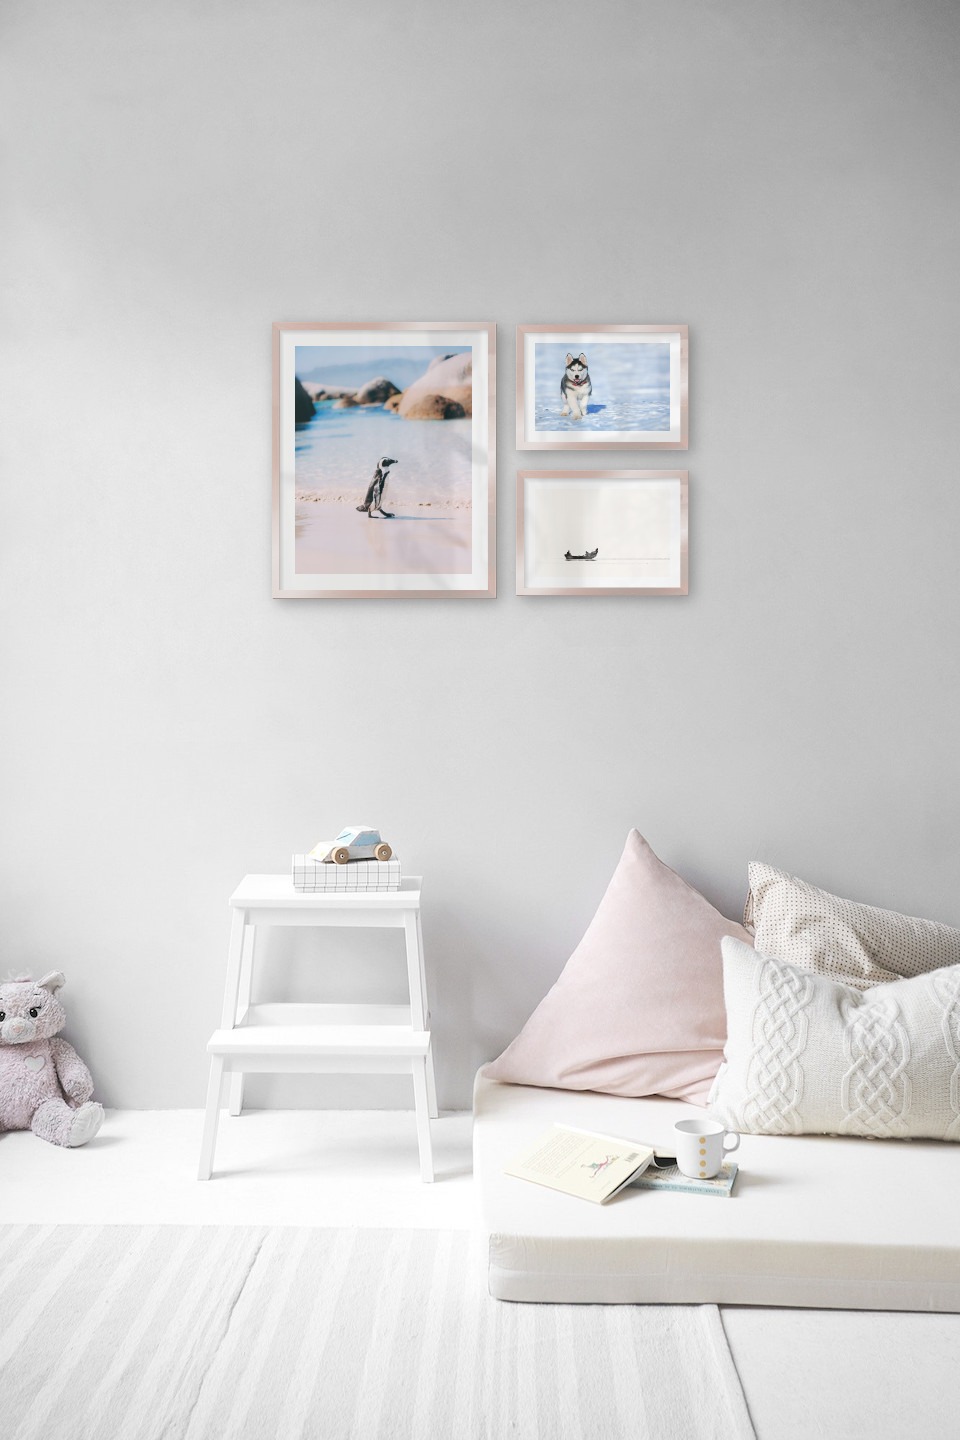 Gallery wall with picture frames in copper in sizes 40x50 and 21x30 with prints "Penguin on the beach", "Husky" and "People in boat"